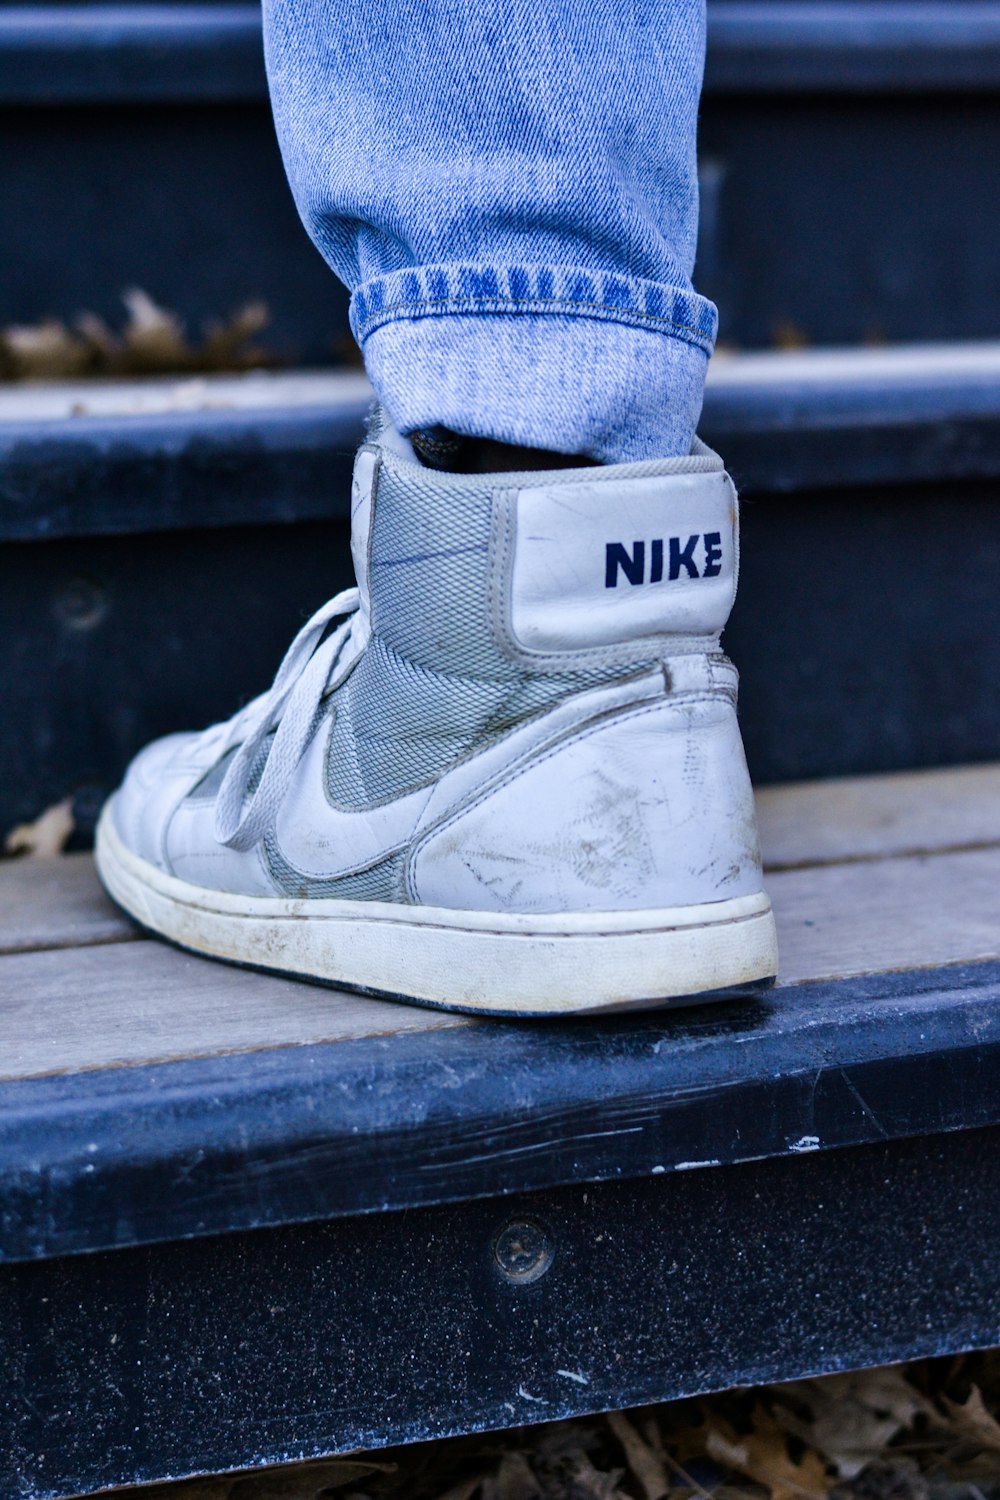 person wearing white and gray Nike sneakers